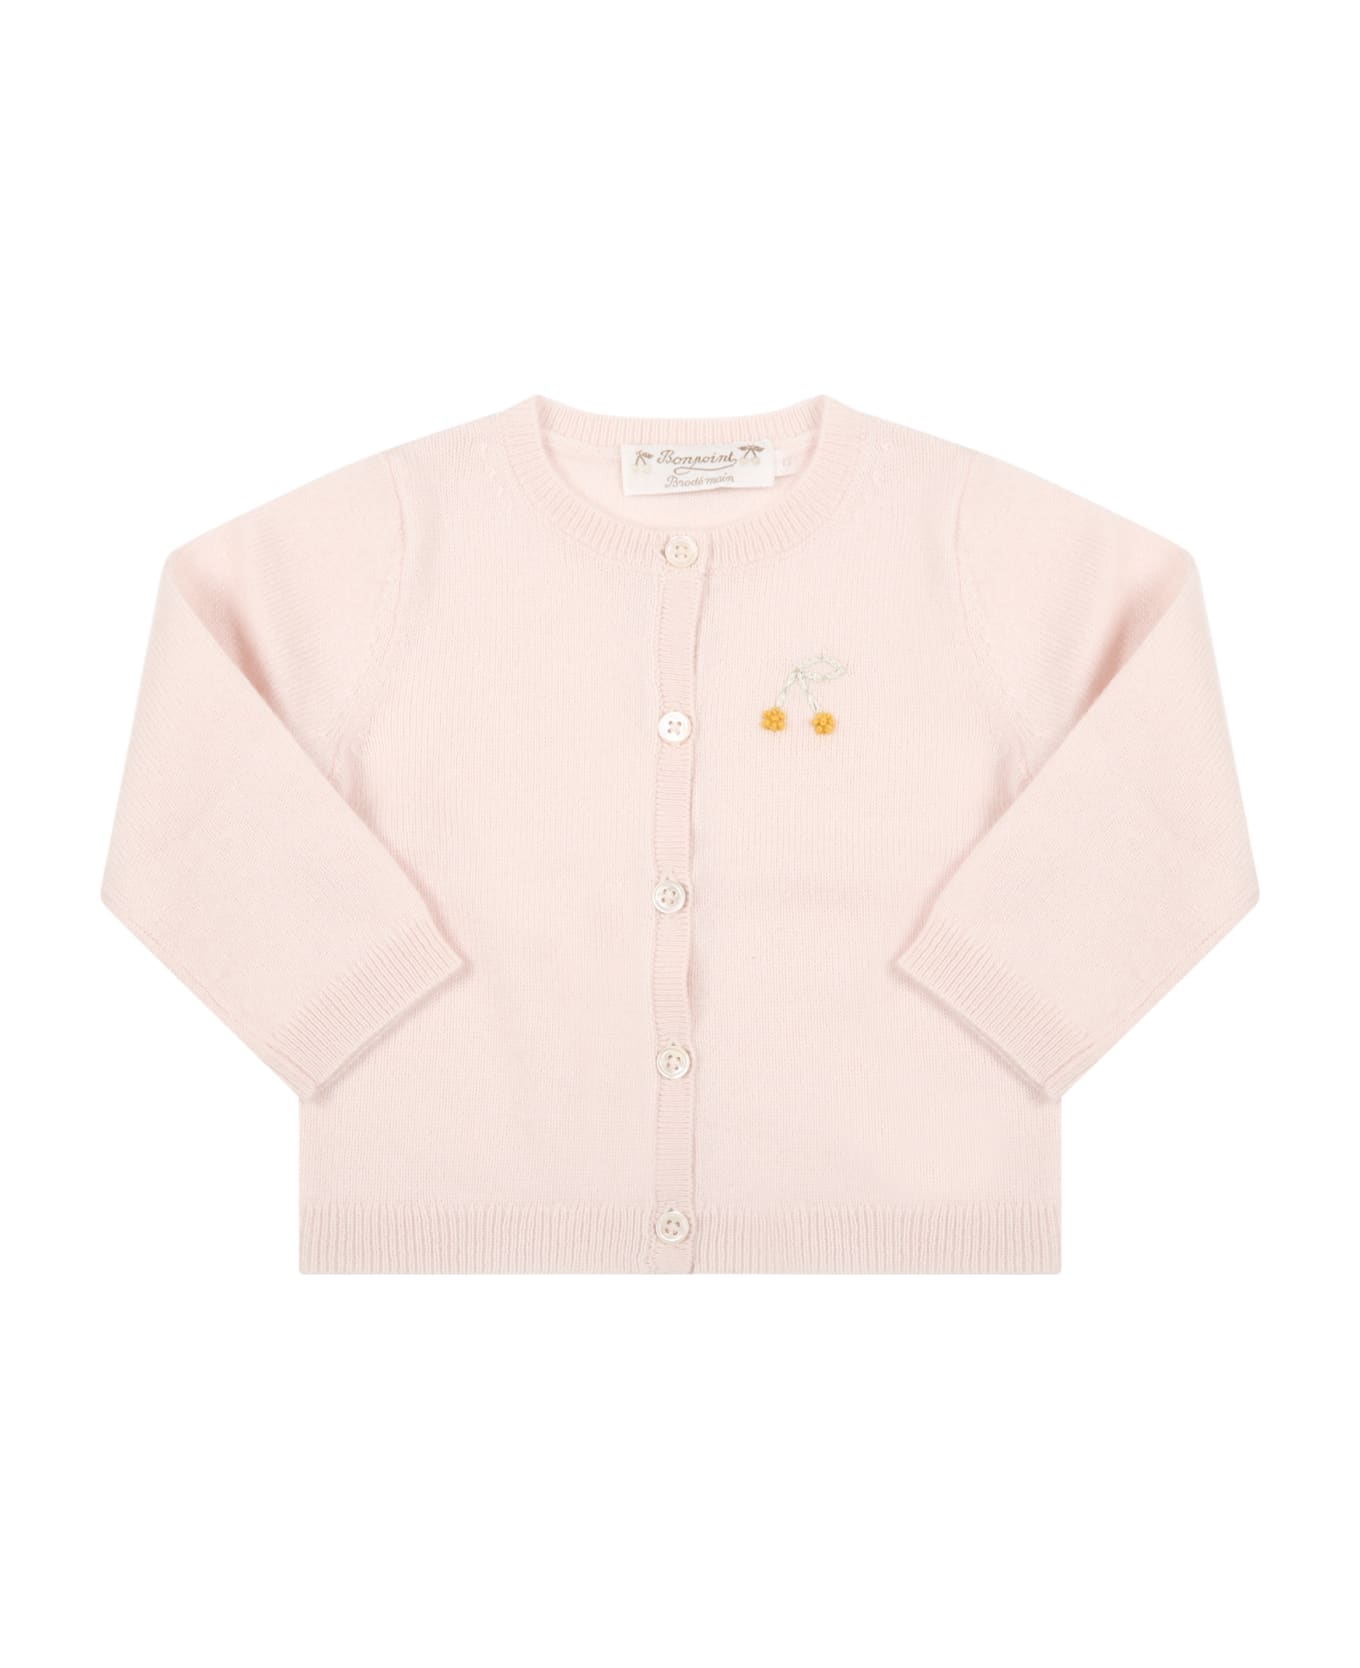 Bonpoint Pink Cardigan For Baby Girl - Pink